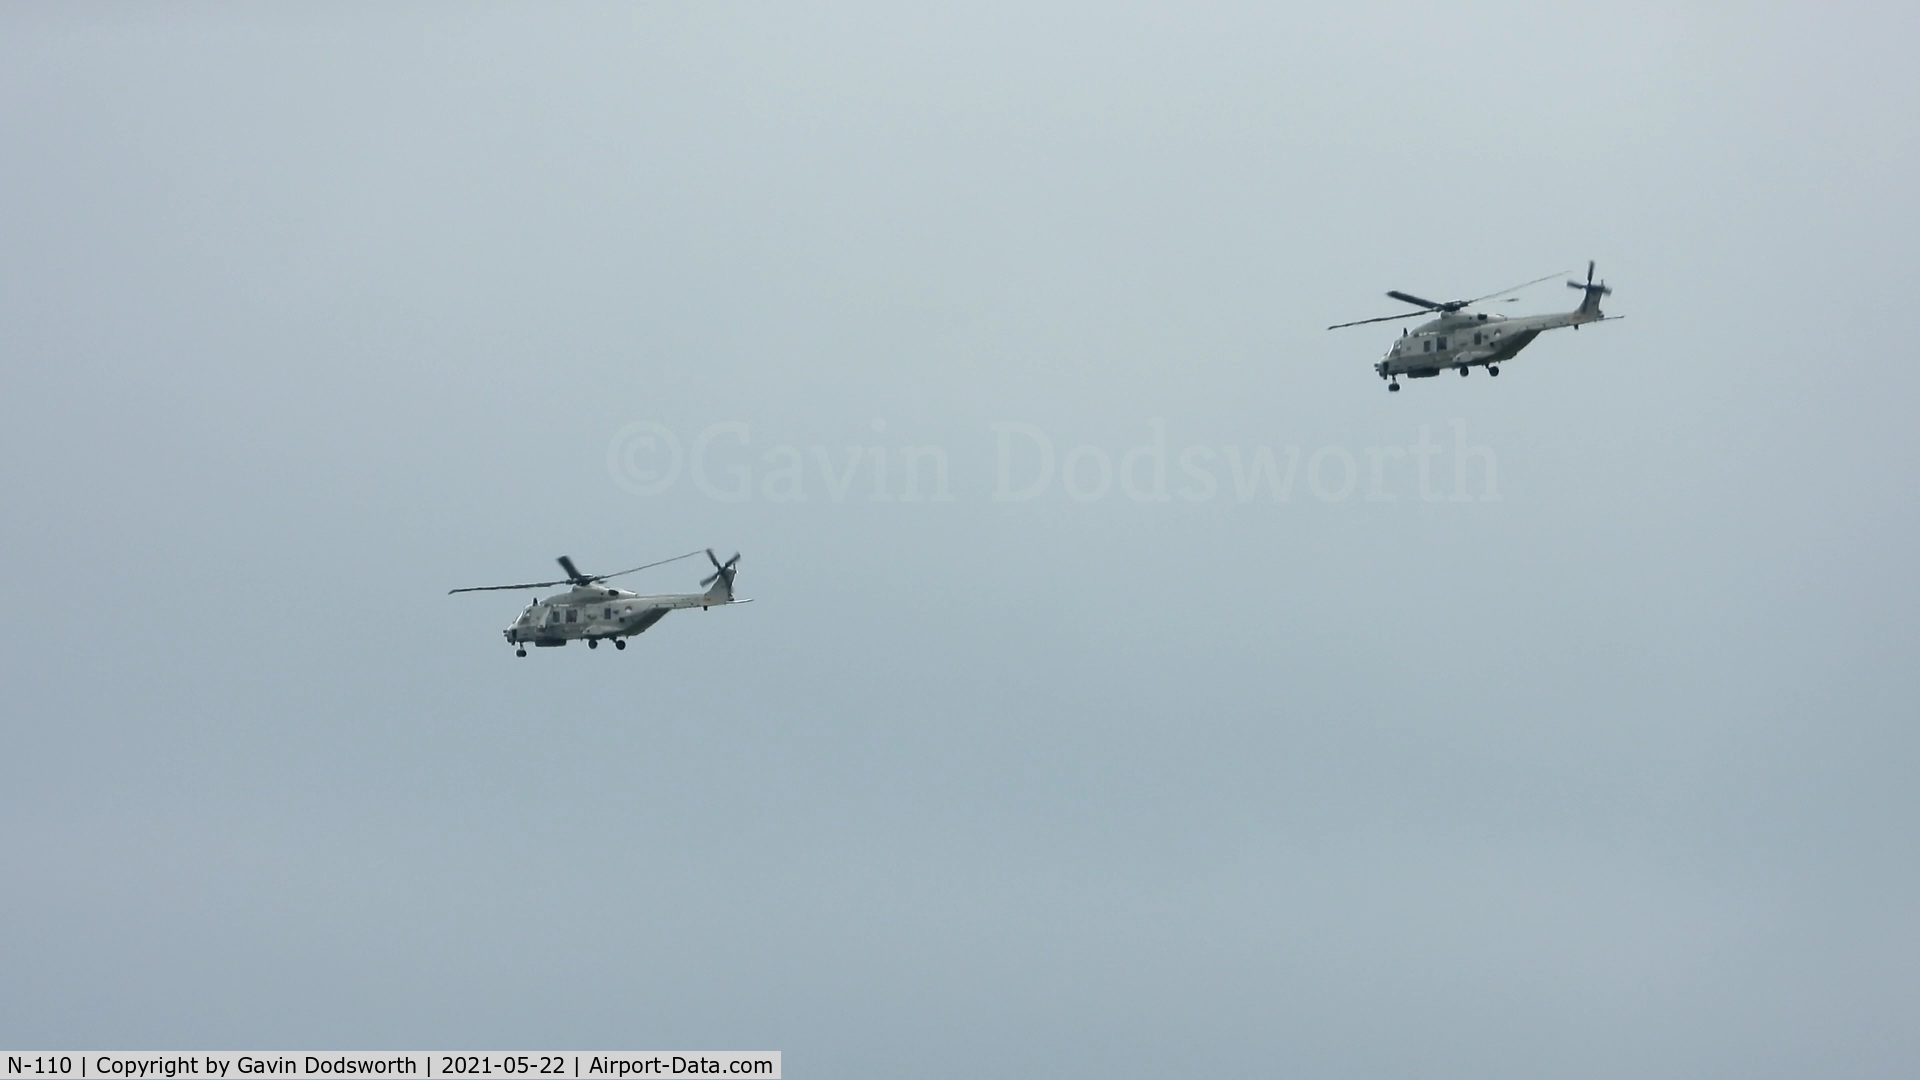 N-110, NHI NH-90 NFH Caiman C/N 1110, N-110 (left) and N-195 (right) inbound to Teesside Airport for fuel on Saturday 22nd May 2021 before departing onwards to Den Helder.